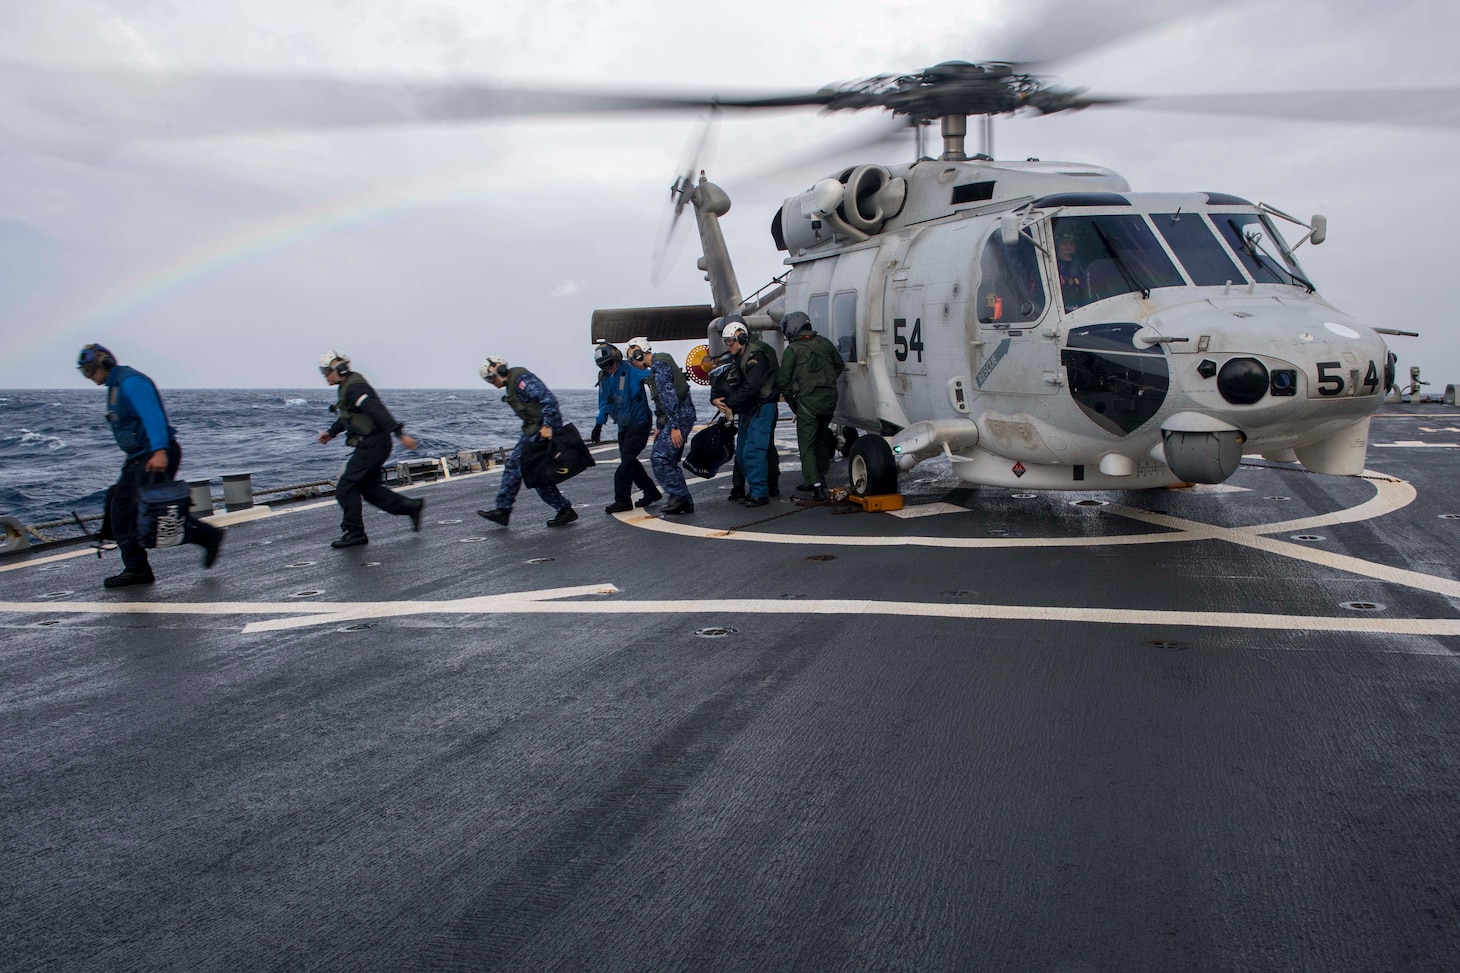 WATERS SOUTH OF JAPAN (Dec. 4, 2018) Japan Maritime Self-Defense Force (JMSDF) sailors, assigned to the JMSDF destroyer JS Hyuga (DDH-181), depart a JMSDF MH-60K Sea Hawk helicopter on the flight deck aboard the Arleigh Burke-class guided-missile destroyer USS Benfold (DDG 65). Benfold is forward-deployed to the U.S. 7th Fleet area of operations in support of security and stability in the Indo-Pacific region.